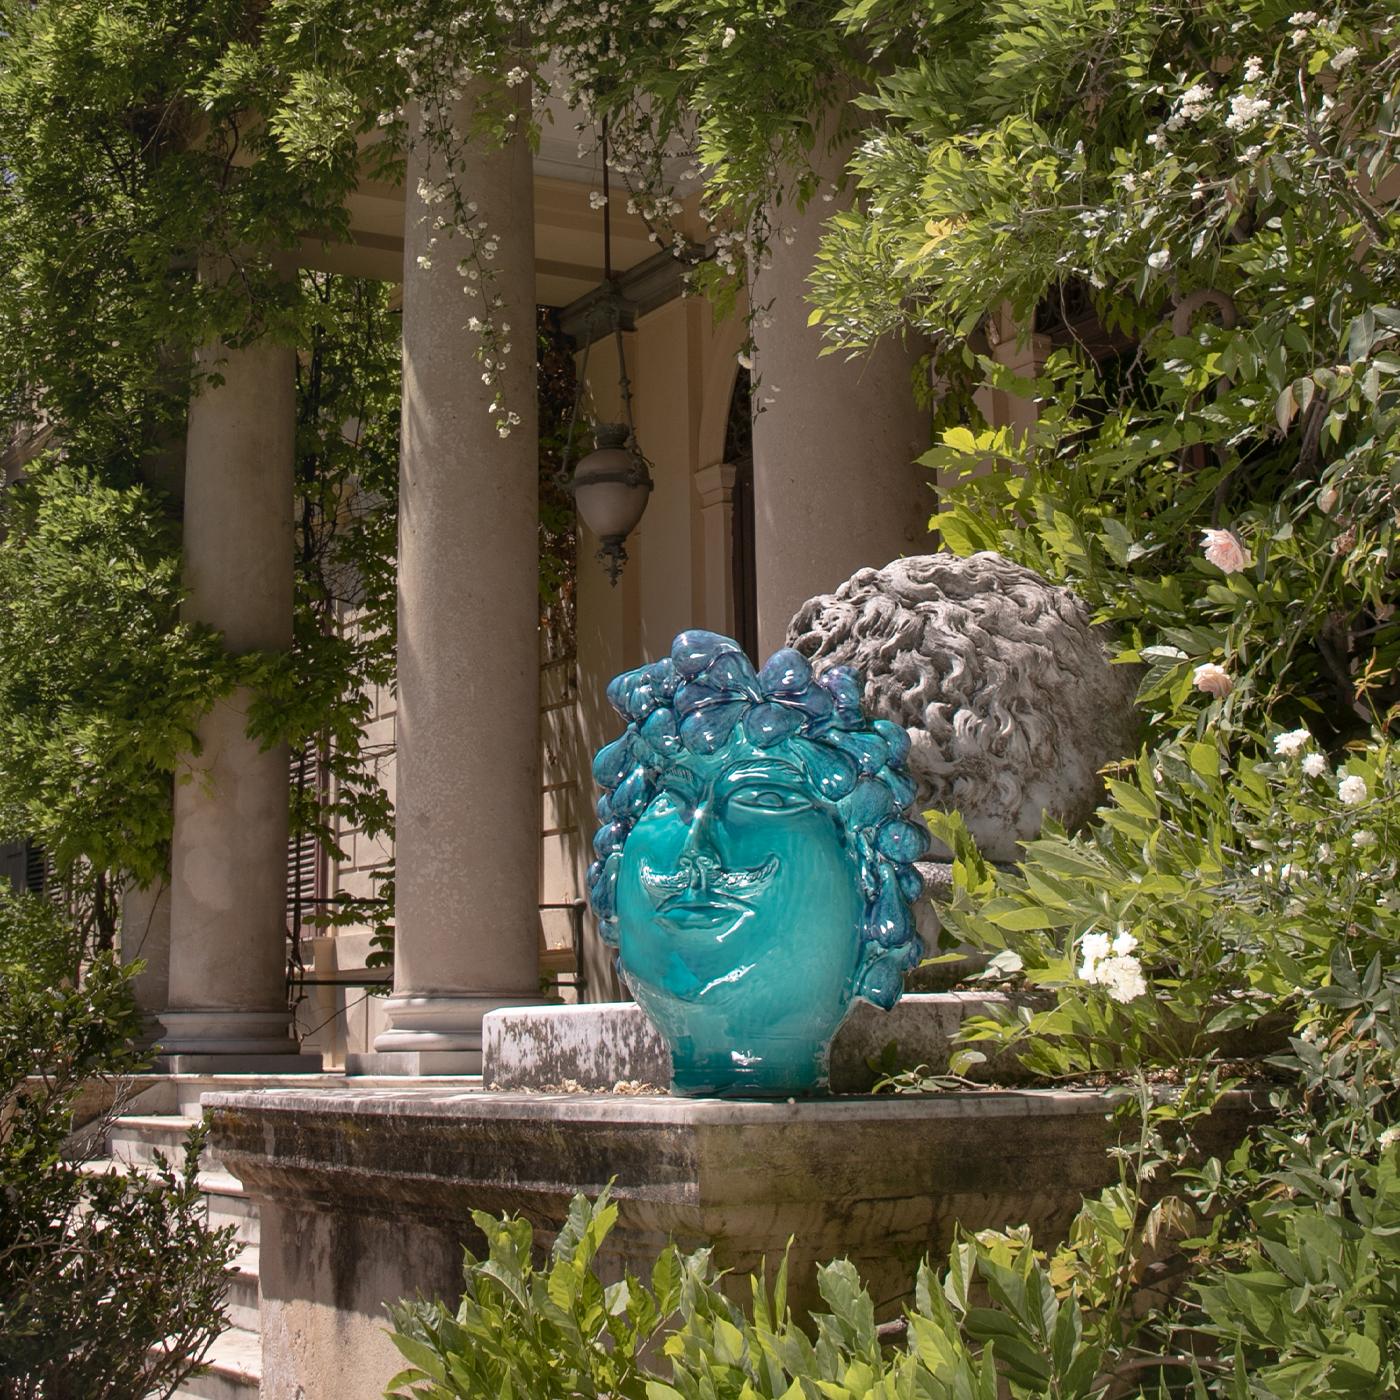 This gorgeous Moor's head from the Sicilian tradition is characterized by an extraordinary wreath made of 120 figs in relief, sculpted and decorated by hand in fine shades of crystalline blue, blue, and turquoise. Either used as a decorative head or